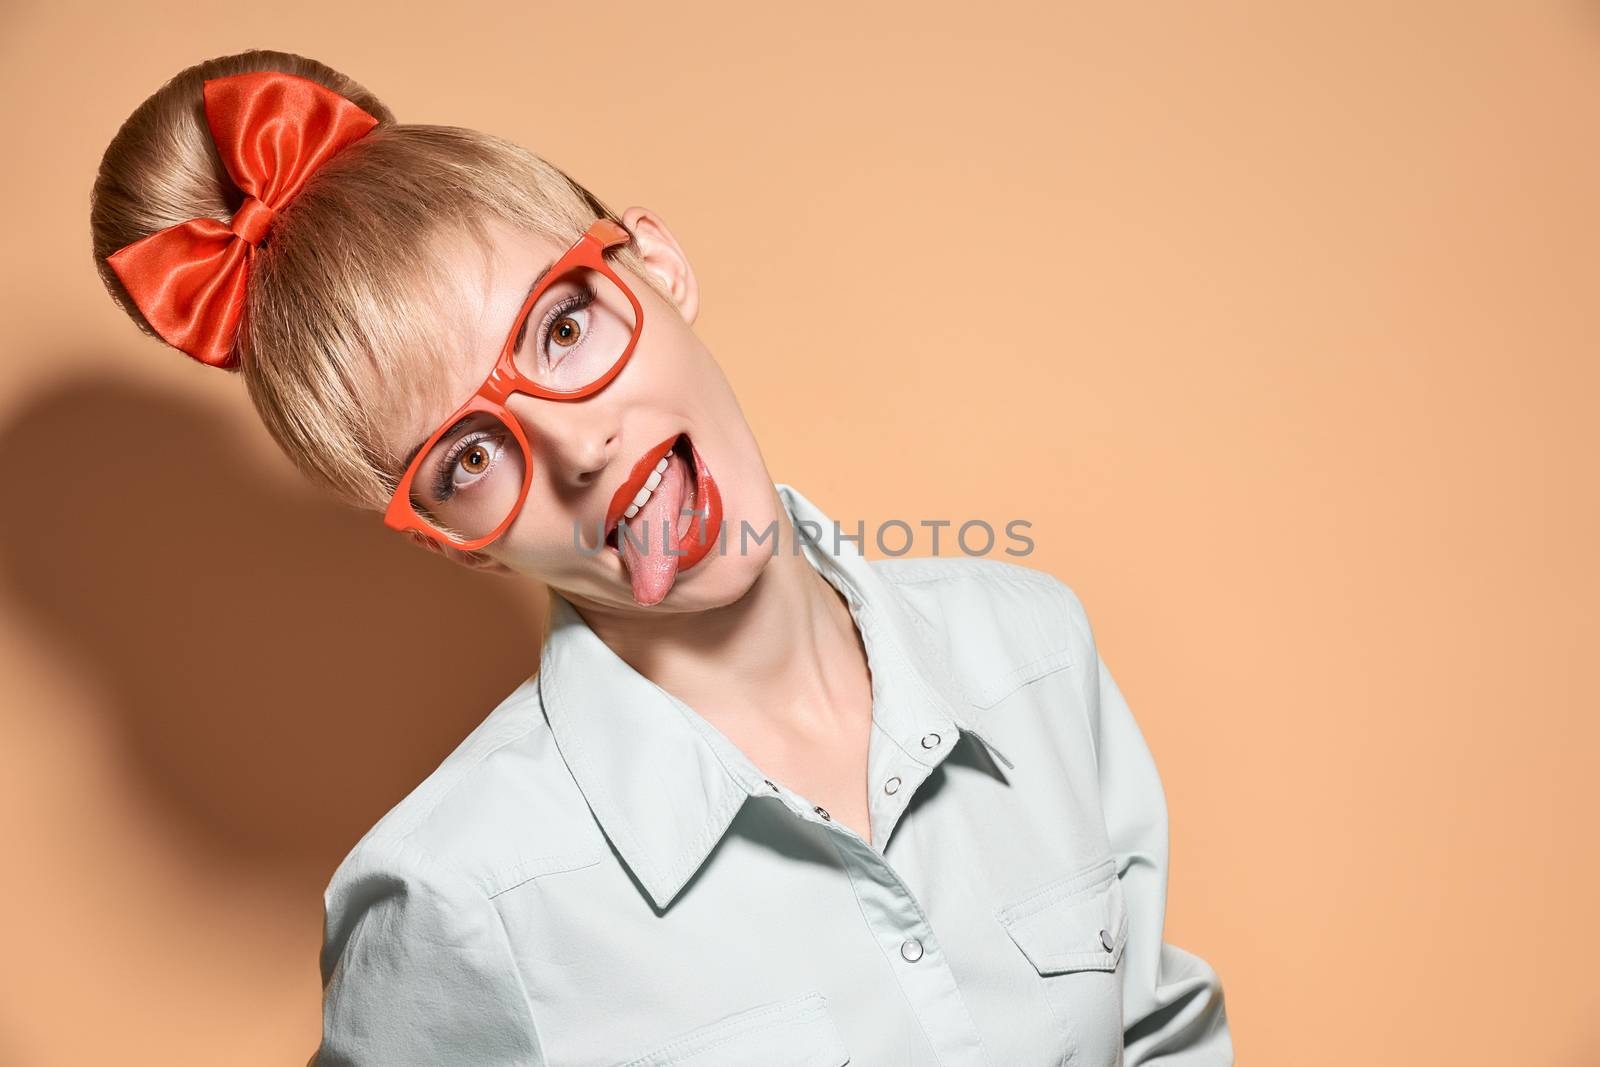 Beauty fashion portrait woman in stylish glasses, tongue hanging out. Attractive pretty blonde sexy hipster girl. Confidence, success, Pinup hairstyle, red bow. Unusual playful, creative. Vintage